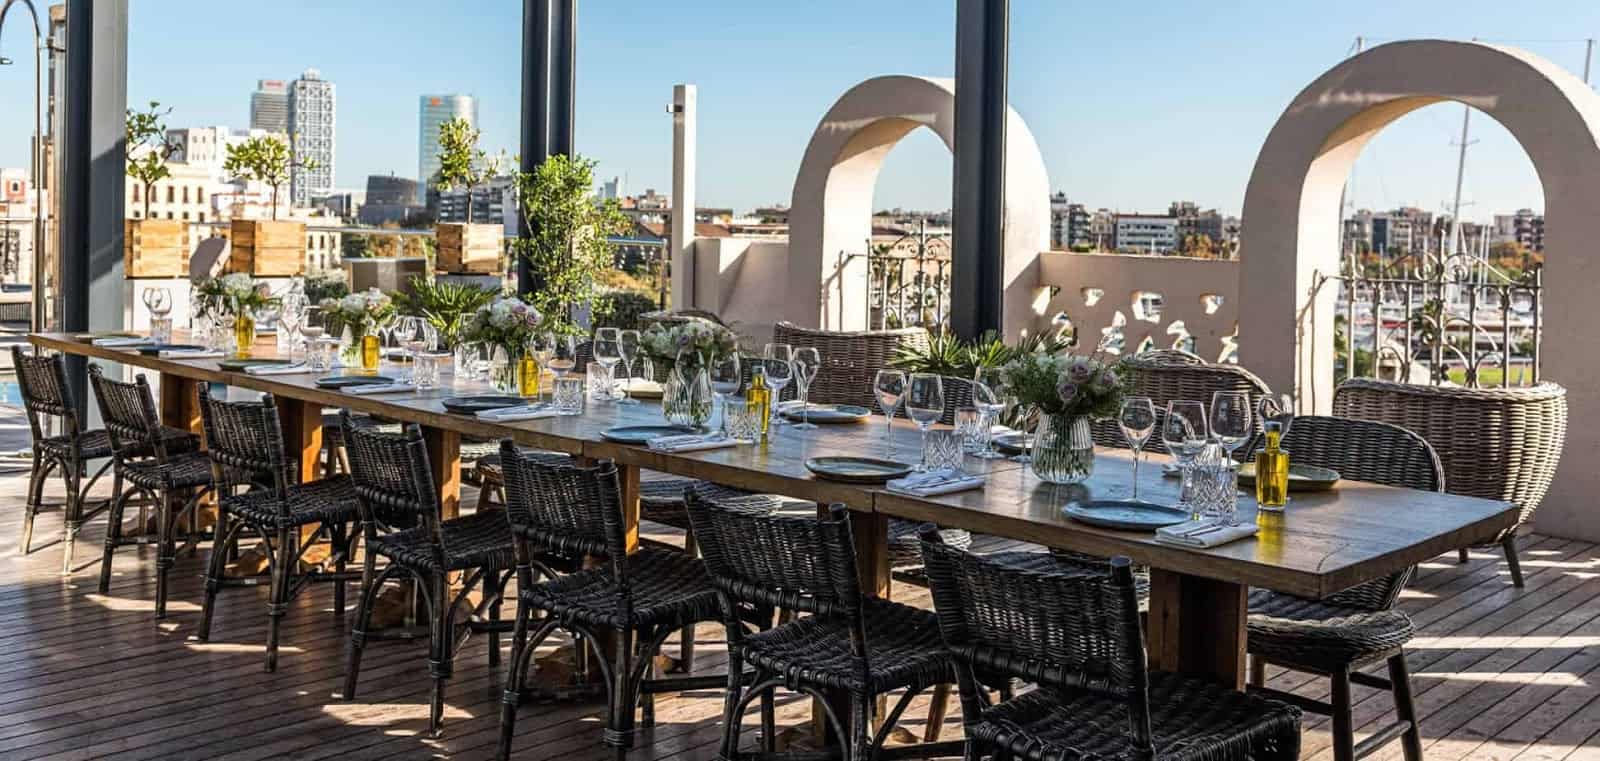 Idyllic Rooftop Group Dining Space in Barcelona